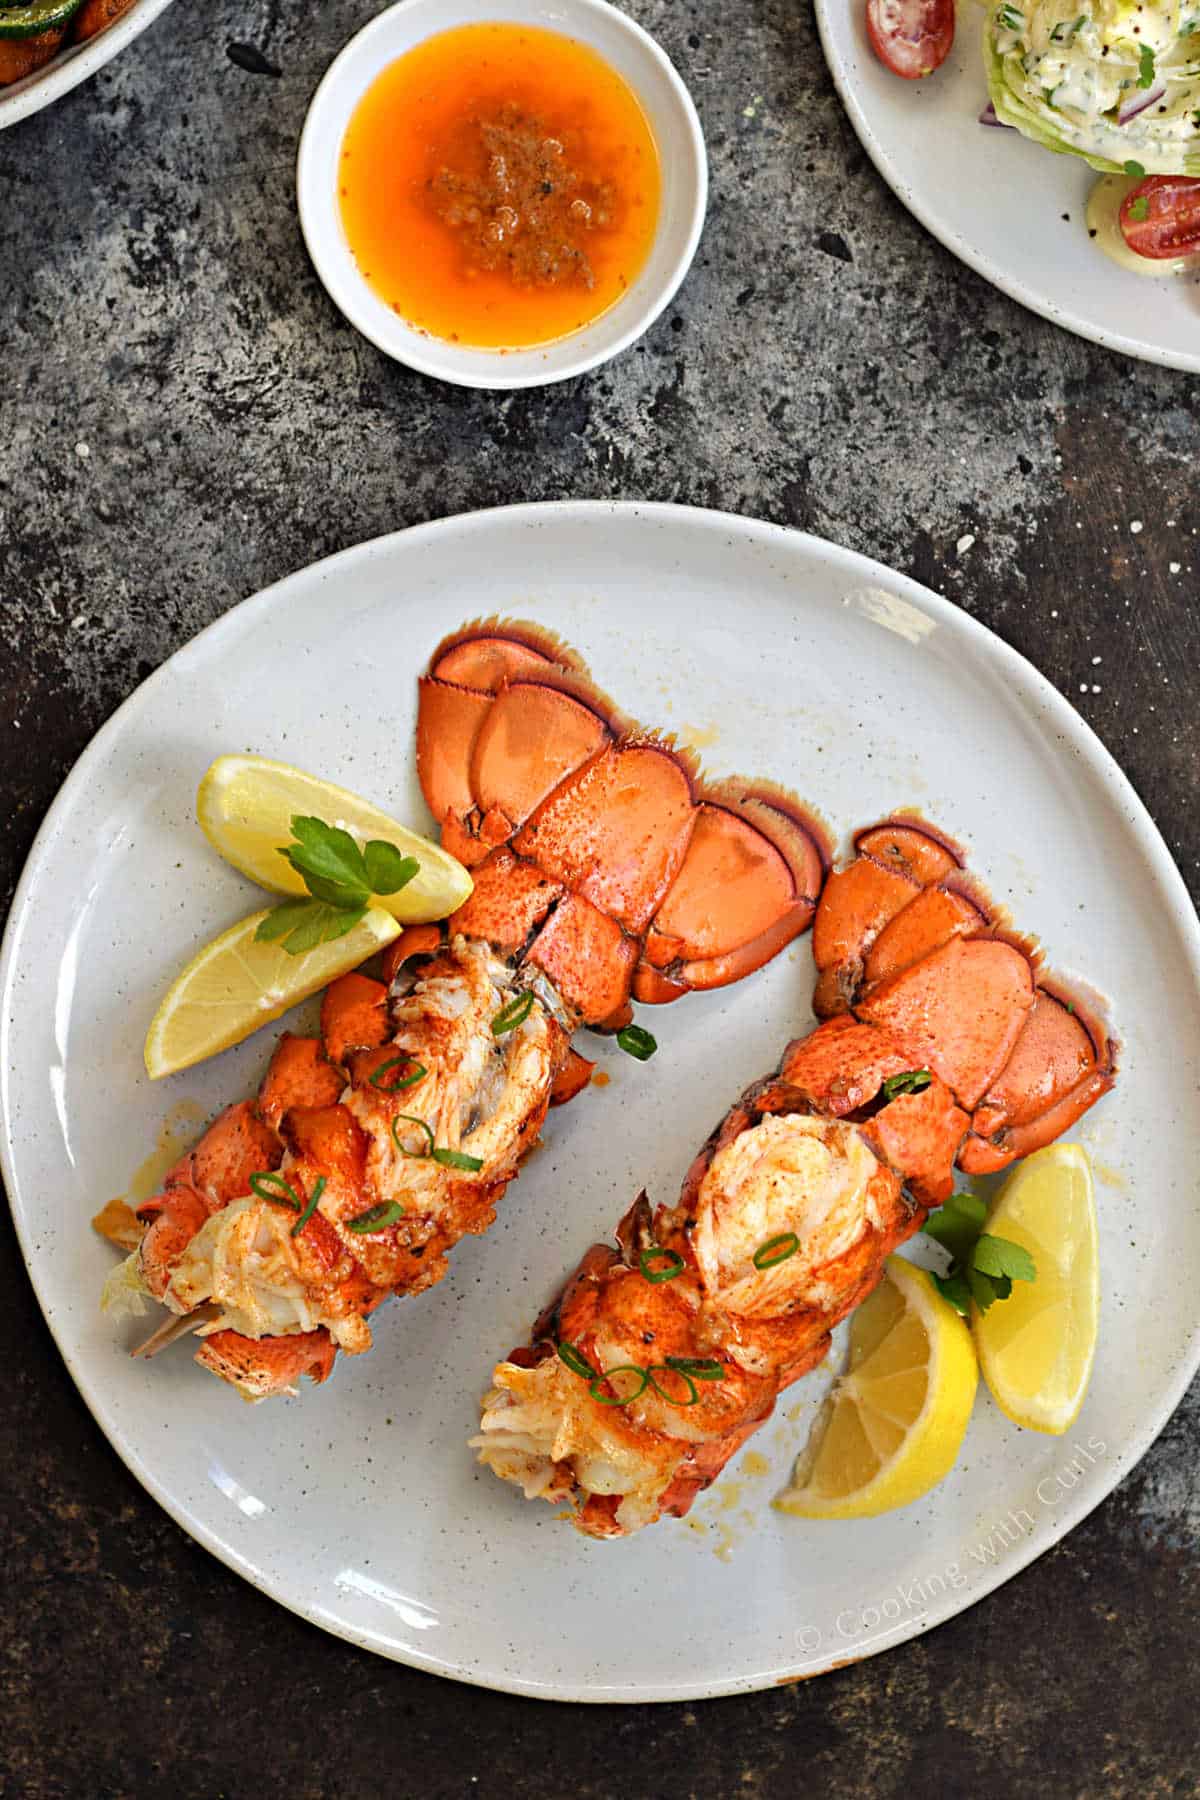 Two broiled lobster tails with lemon wedges and a bowl of garlic butter on the side.